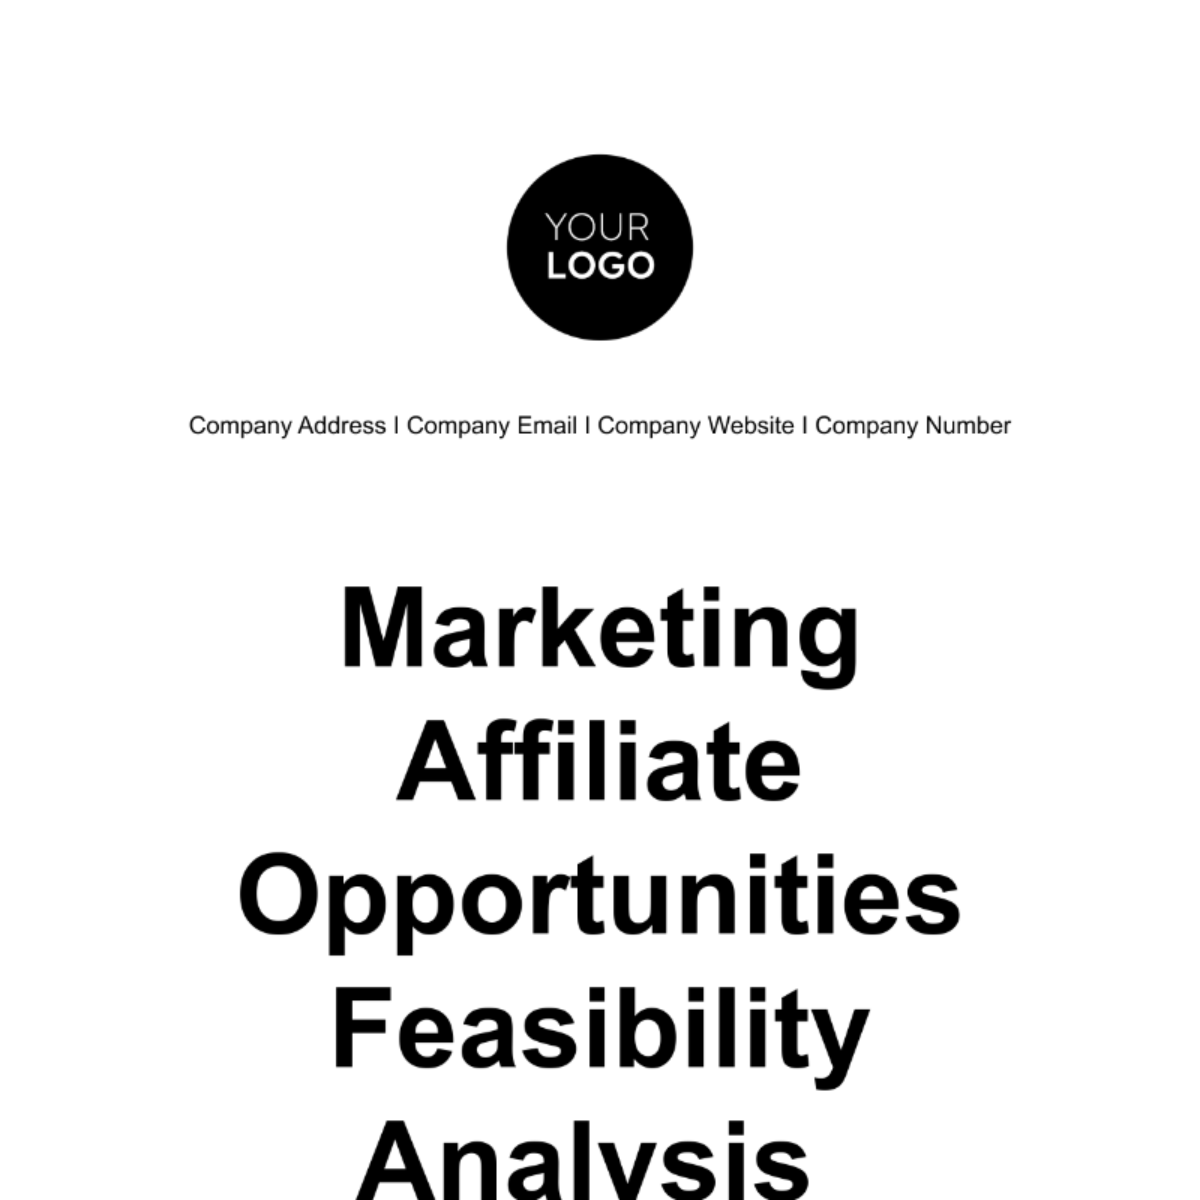 Marketing Affiliate Opportunities Feasibility Analysis Template